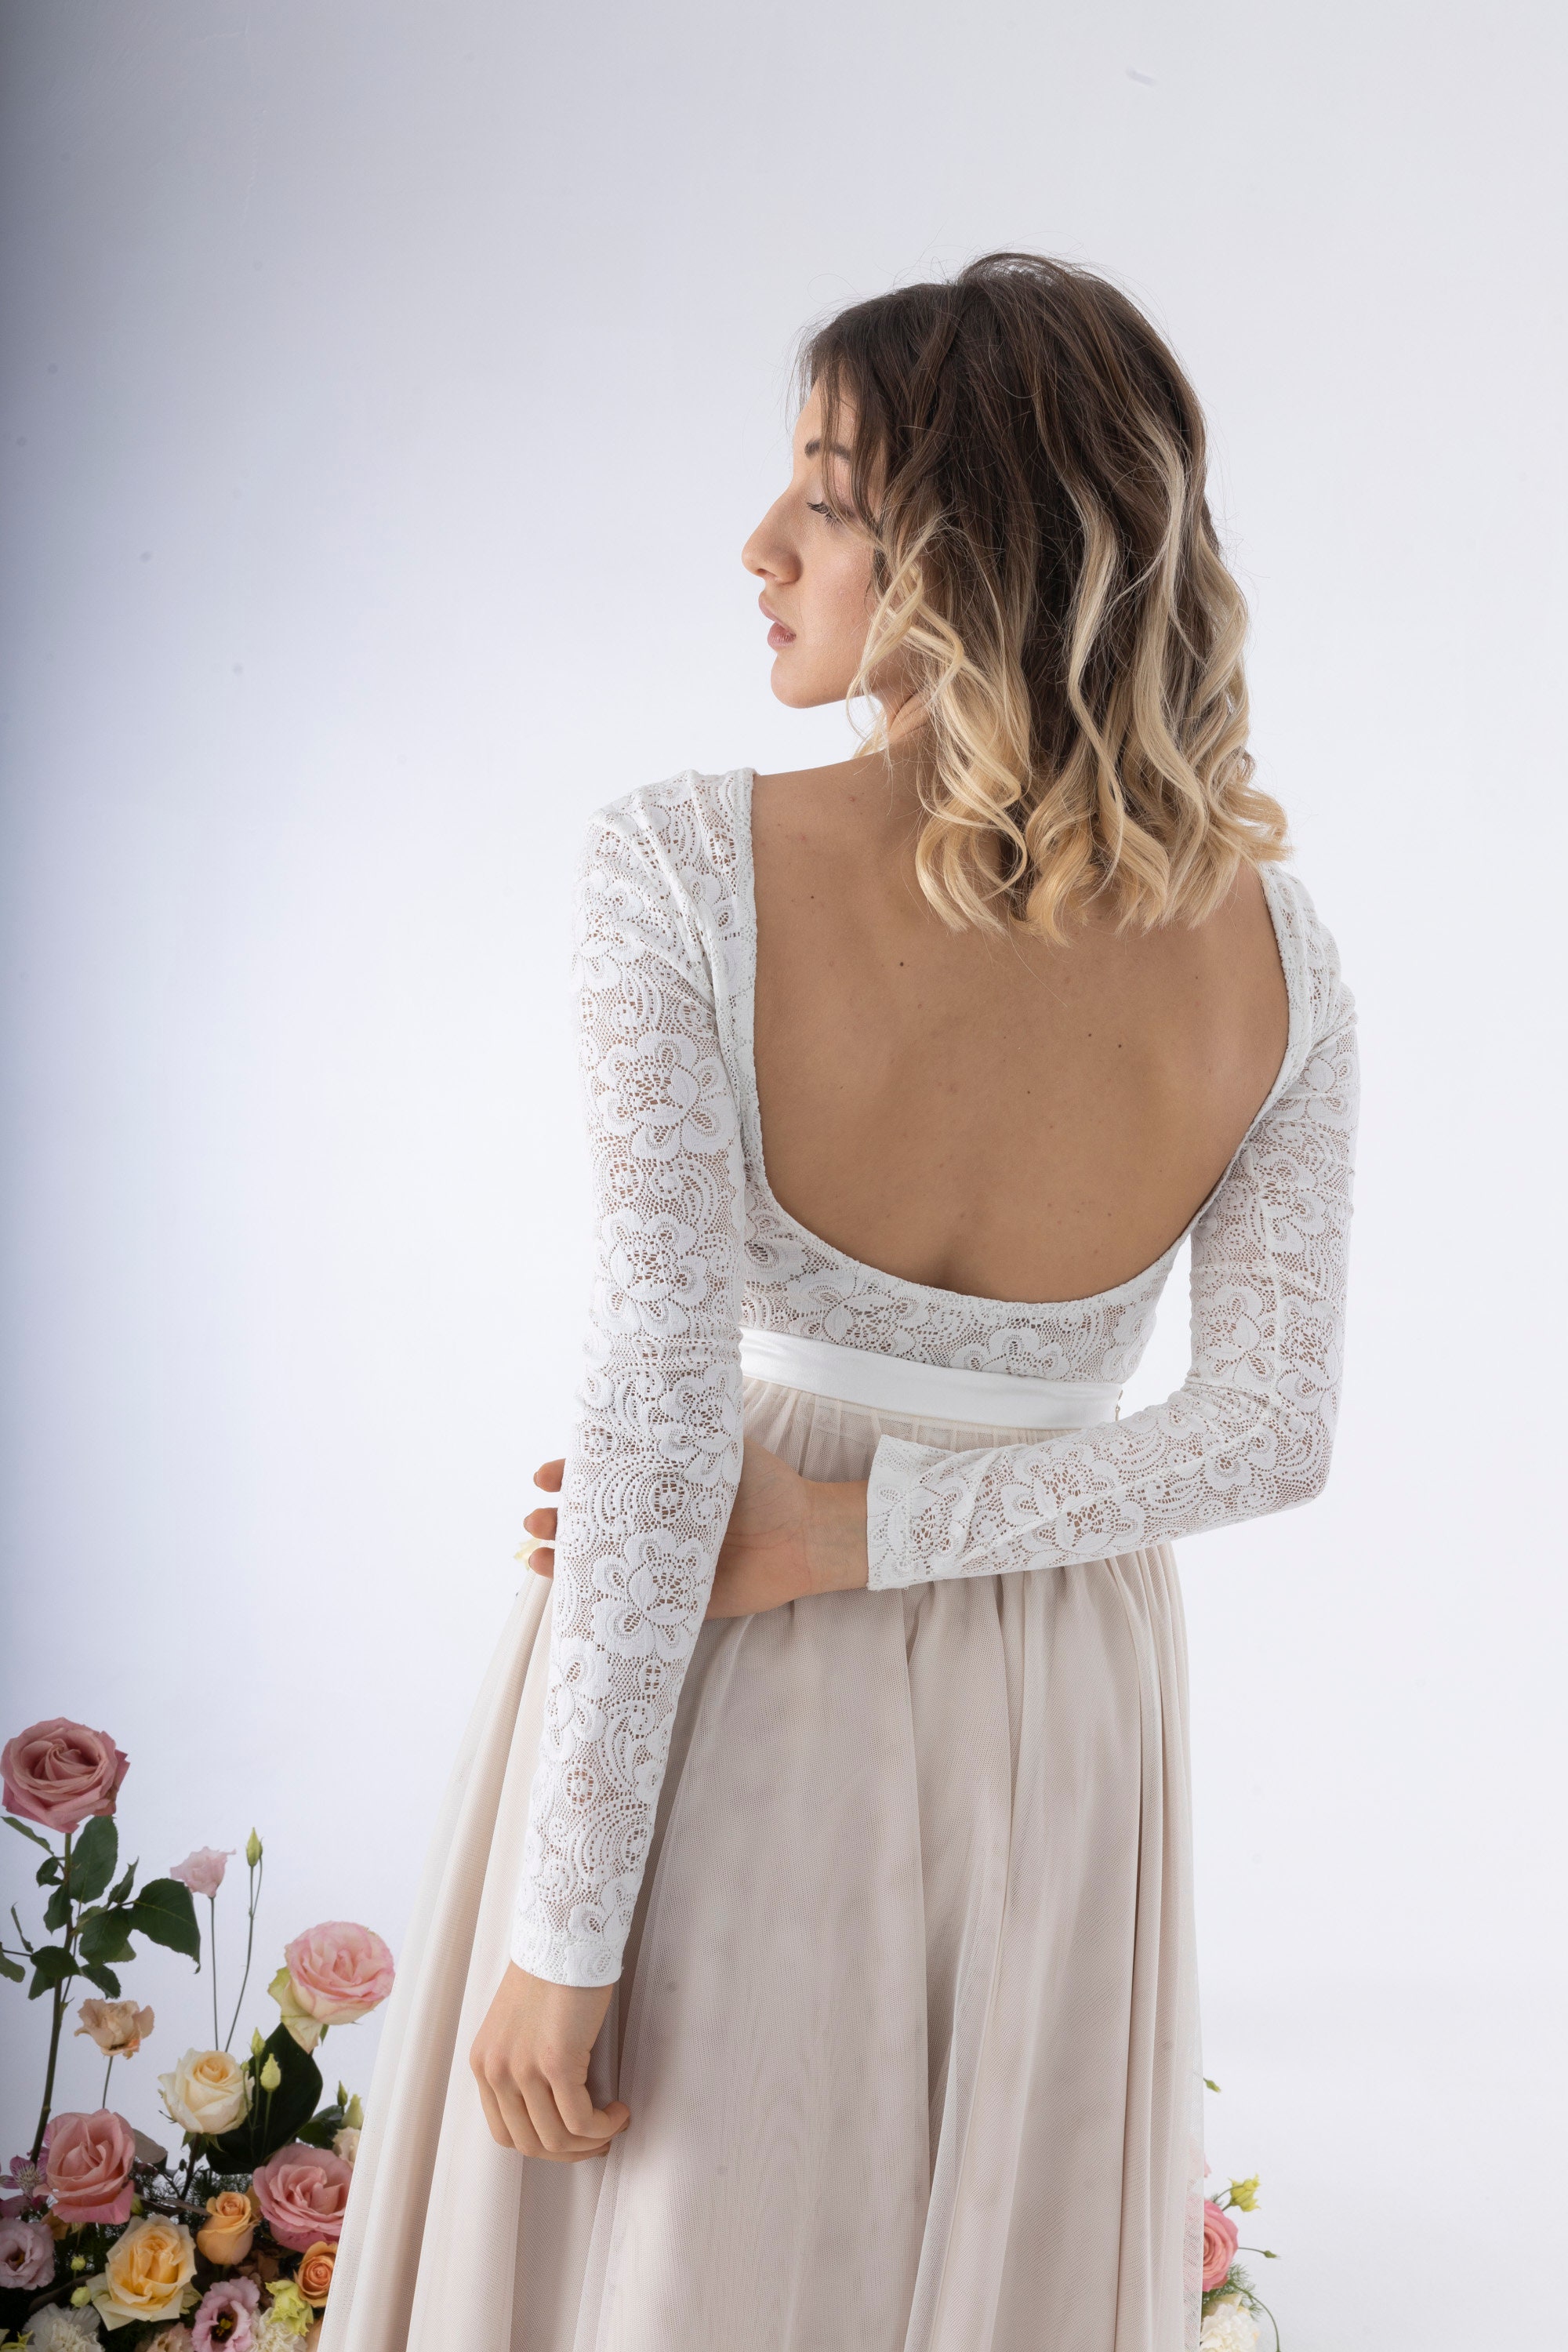 Wedding Lace Bodysuit With Long Sleeves and Open Back, Lace Bridal Bodysuit  With Low Back, Wedding Separates Dress, Boho Lace Wedding Top -  Canada